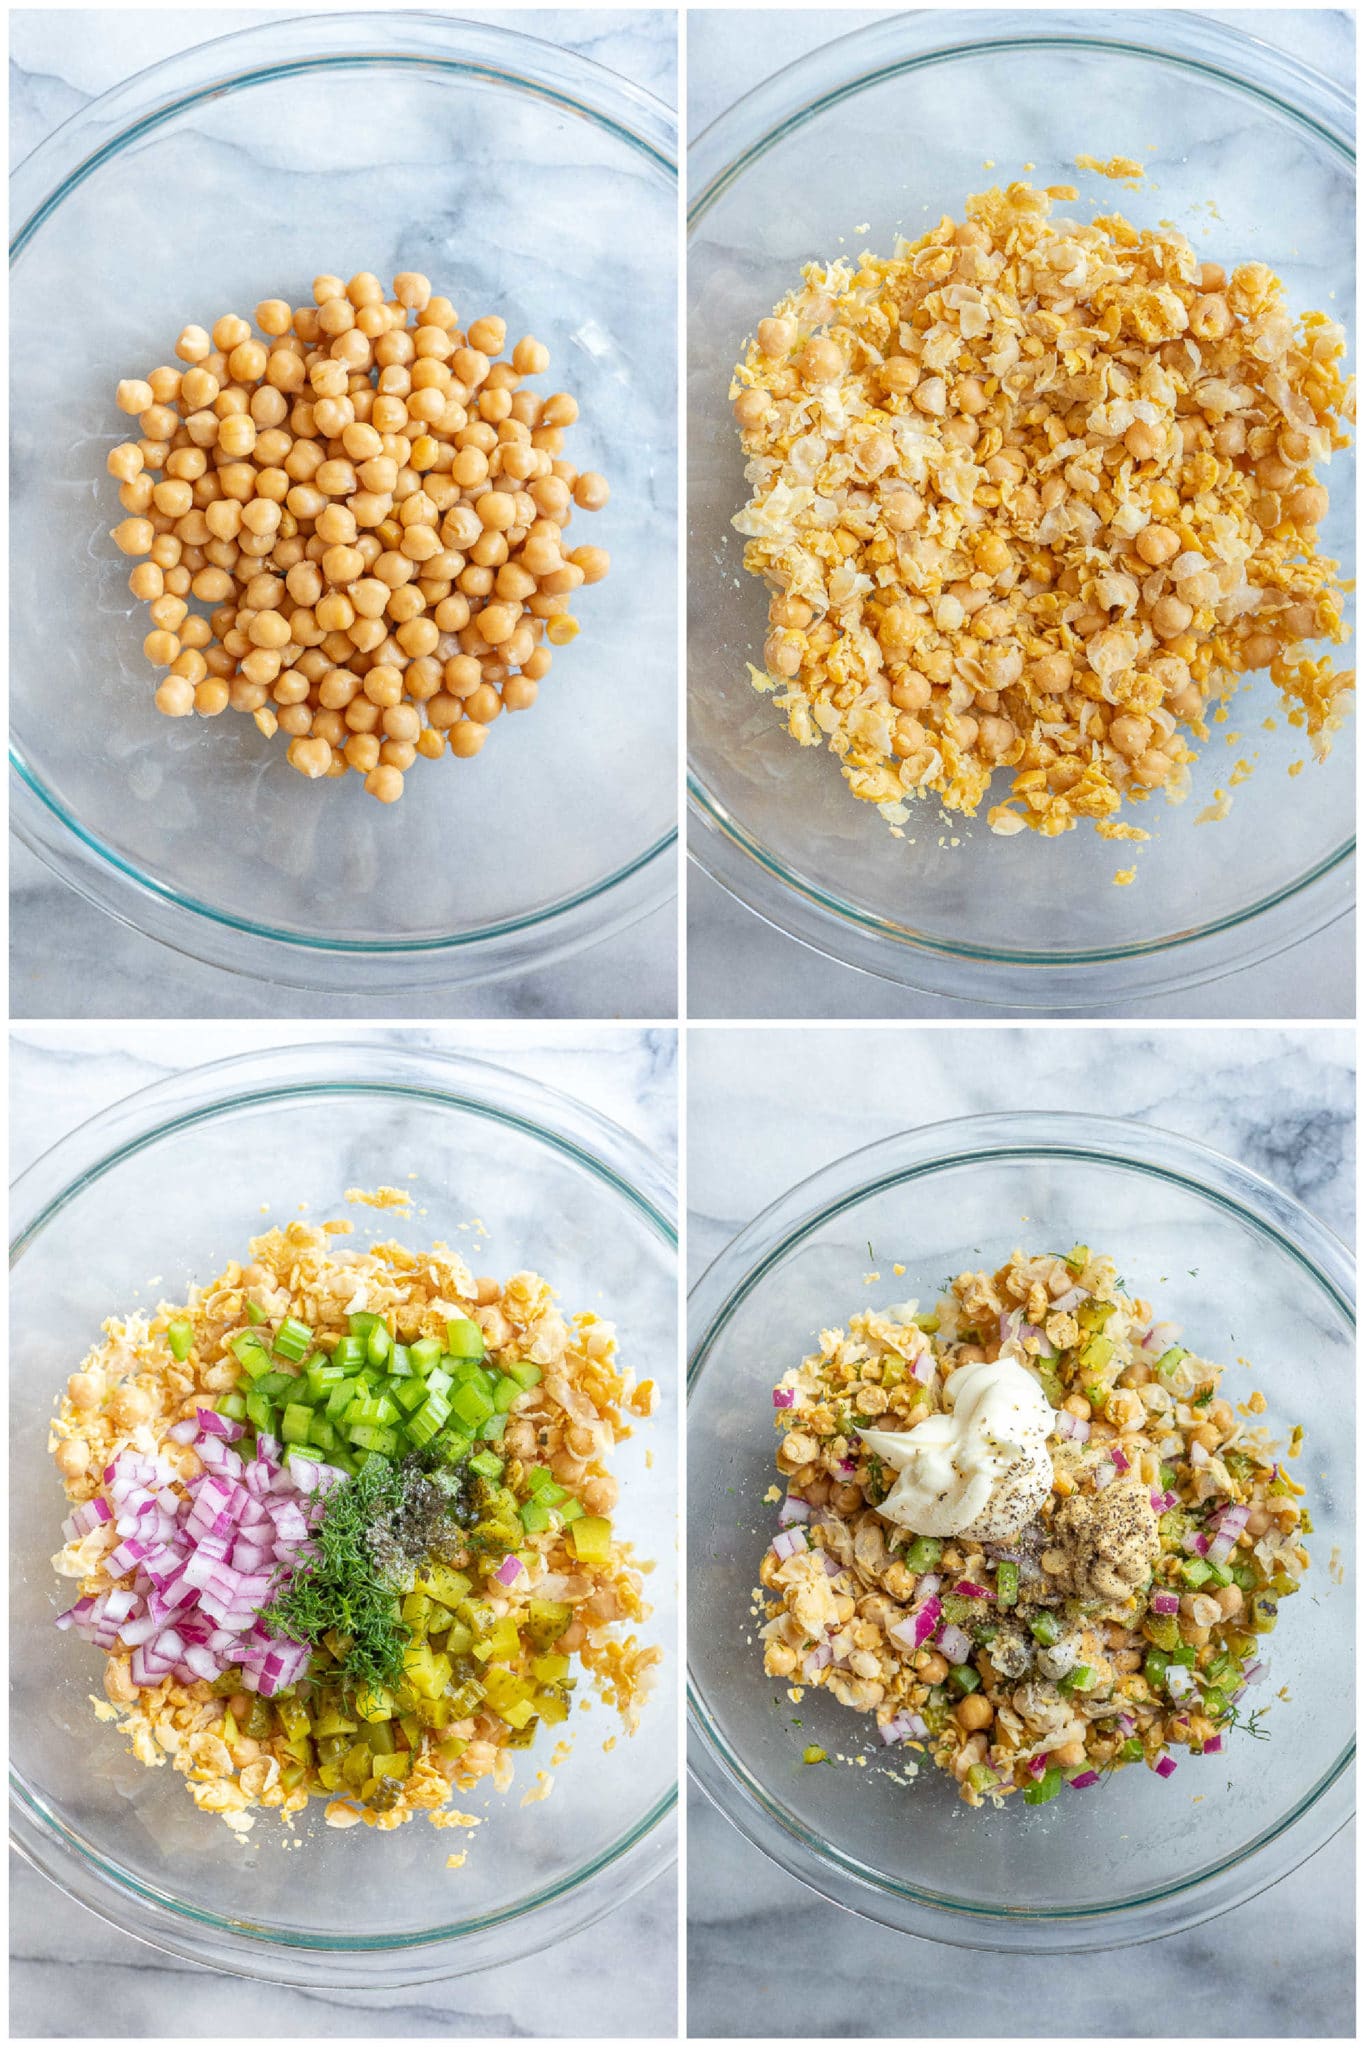 showing how to make vegan tuna salad using chickpeas and vegetables